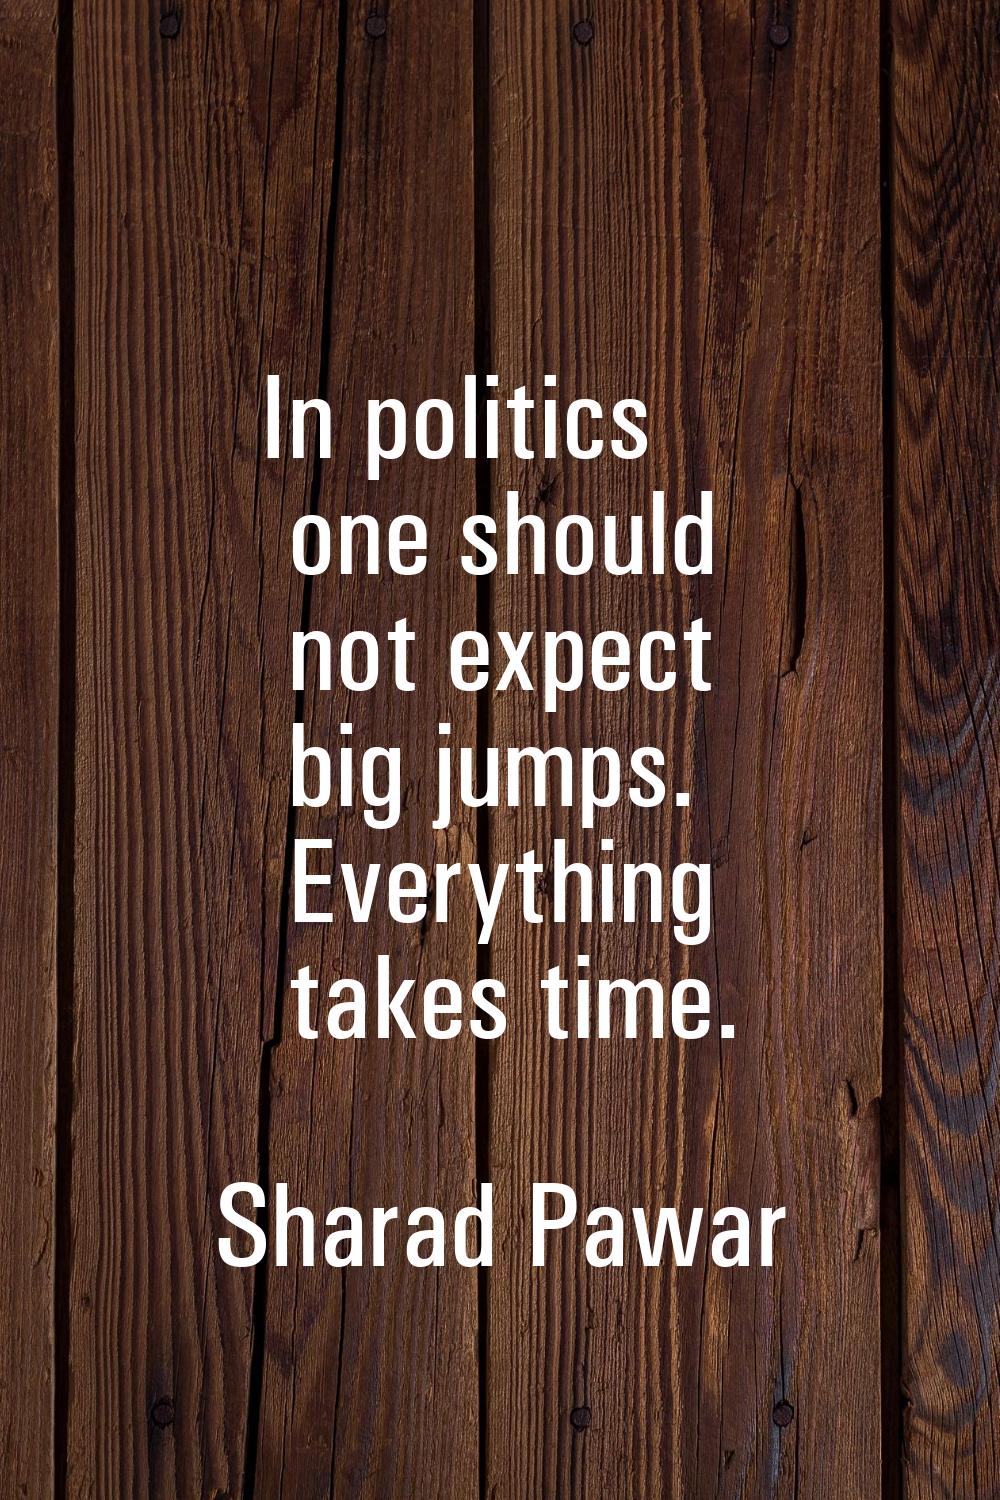 In politics one should not expect big jumps. Everything takes time.